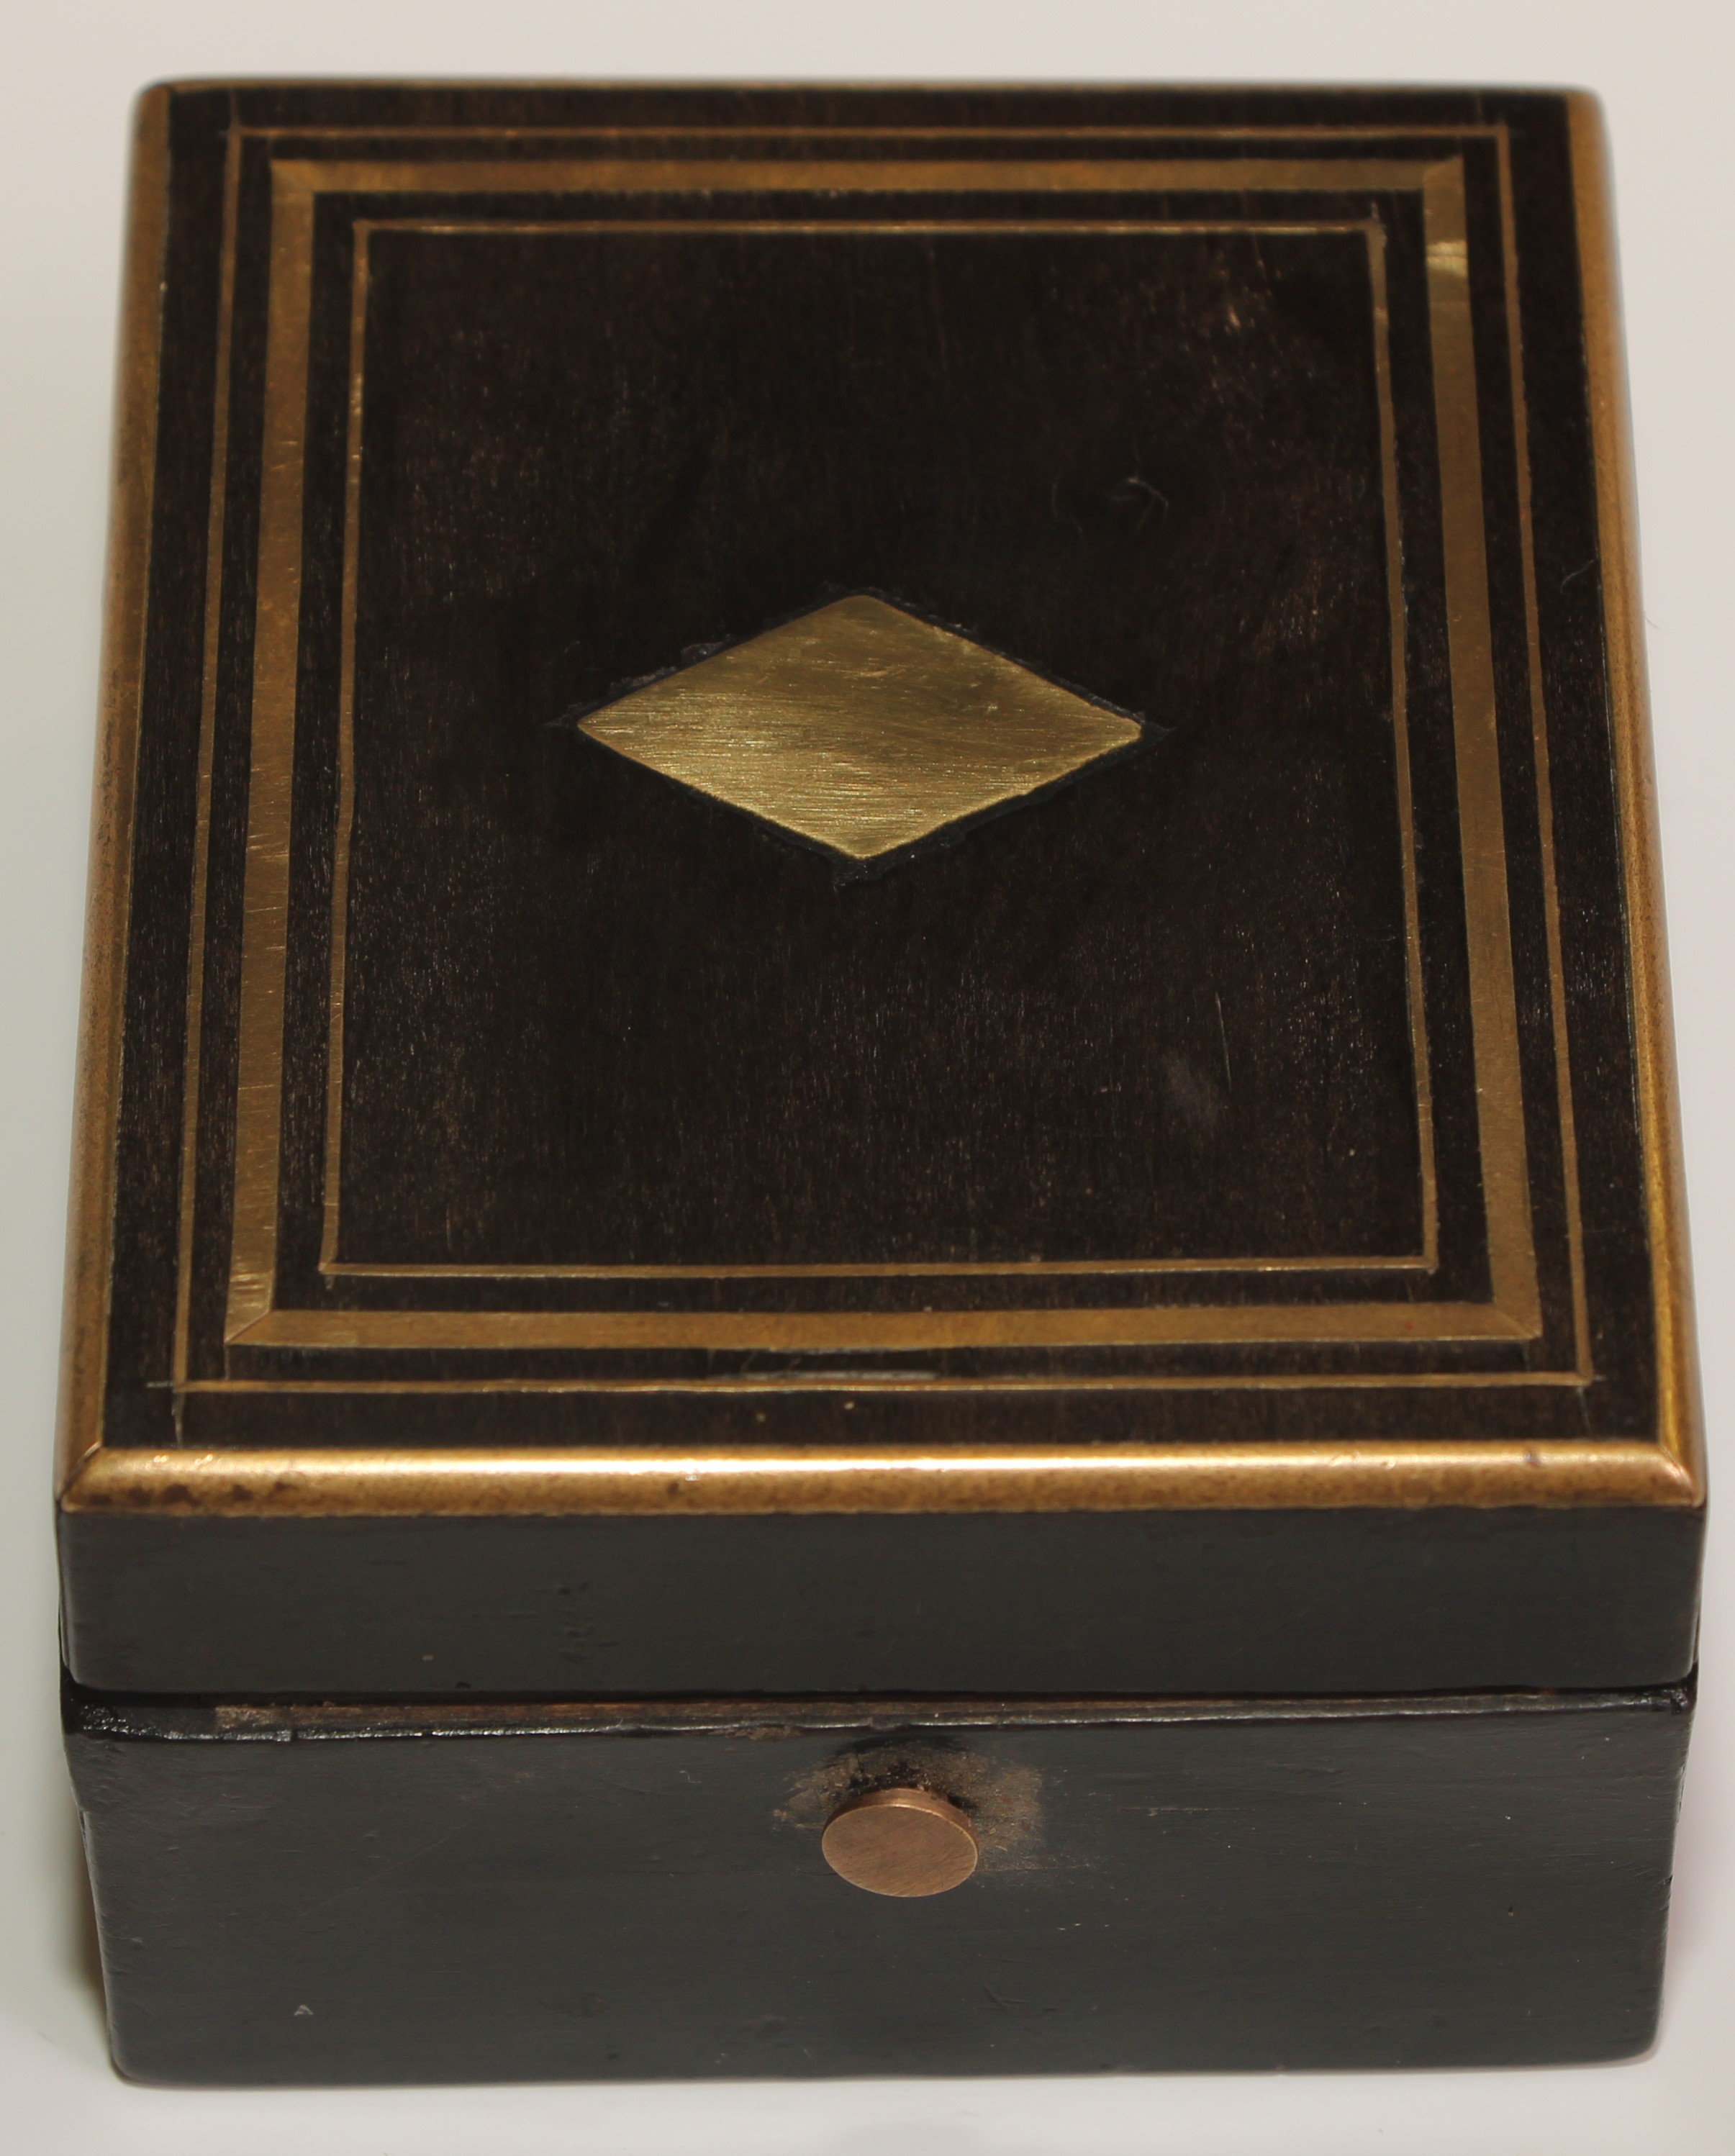 A 19th century French ebonised pocket watch box, hinged cover inlaid with a lozenge and outlined - Image 2 of 4